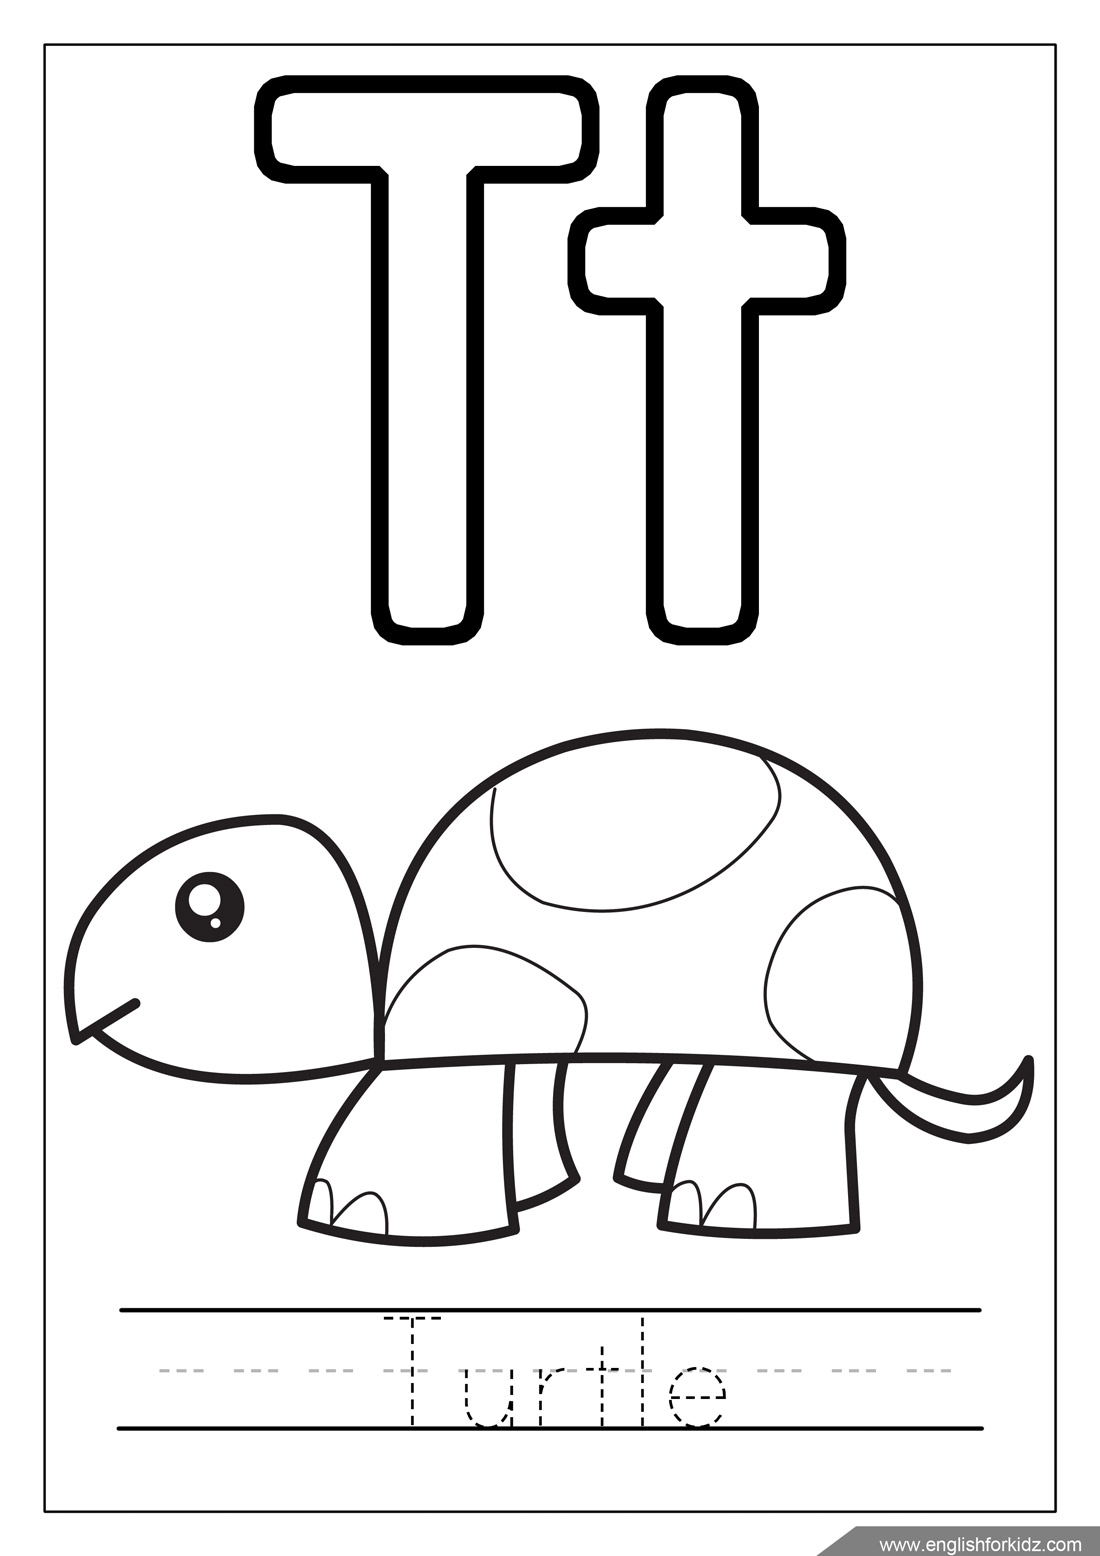 English for Kids Step by Step: Alphabet Coloring Pages (Letters K - T)